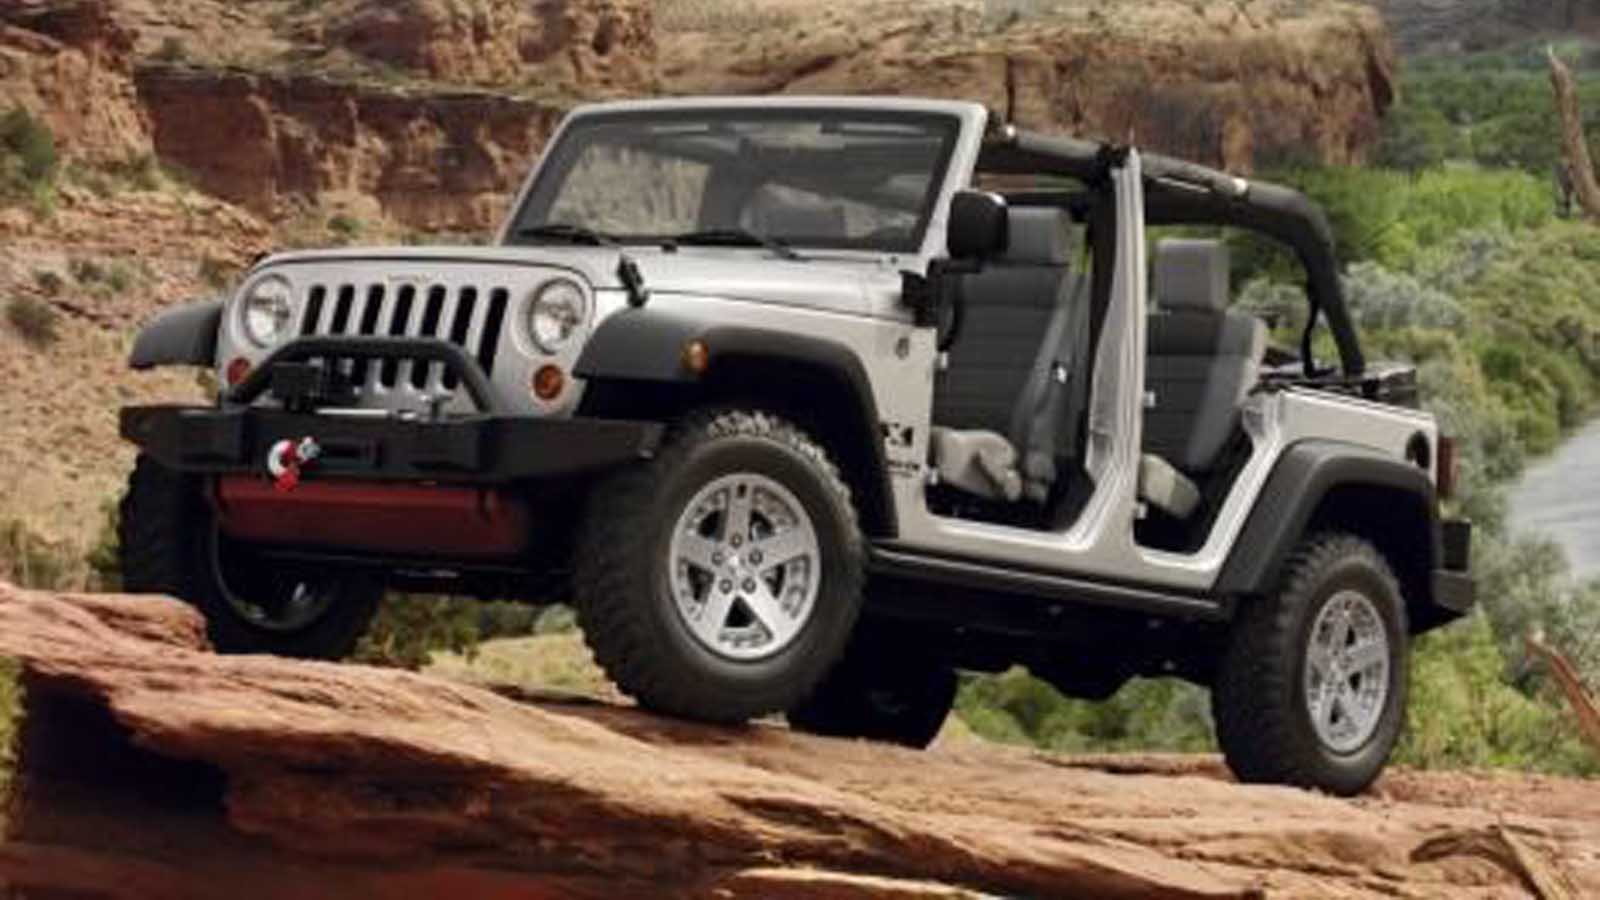 6 Reasons for Removing the Doors on Your Wrangler | Jk-forum